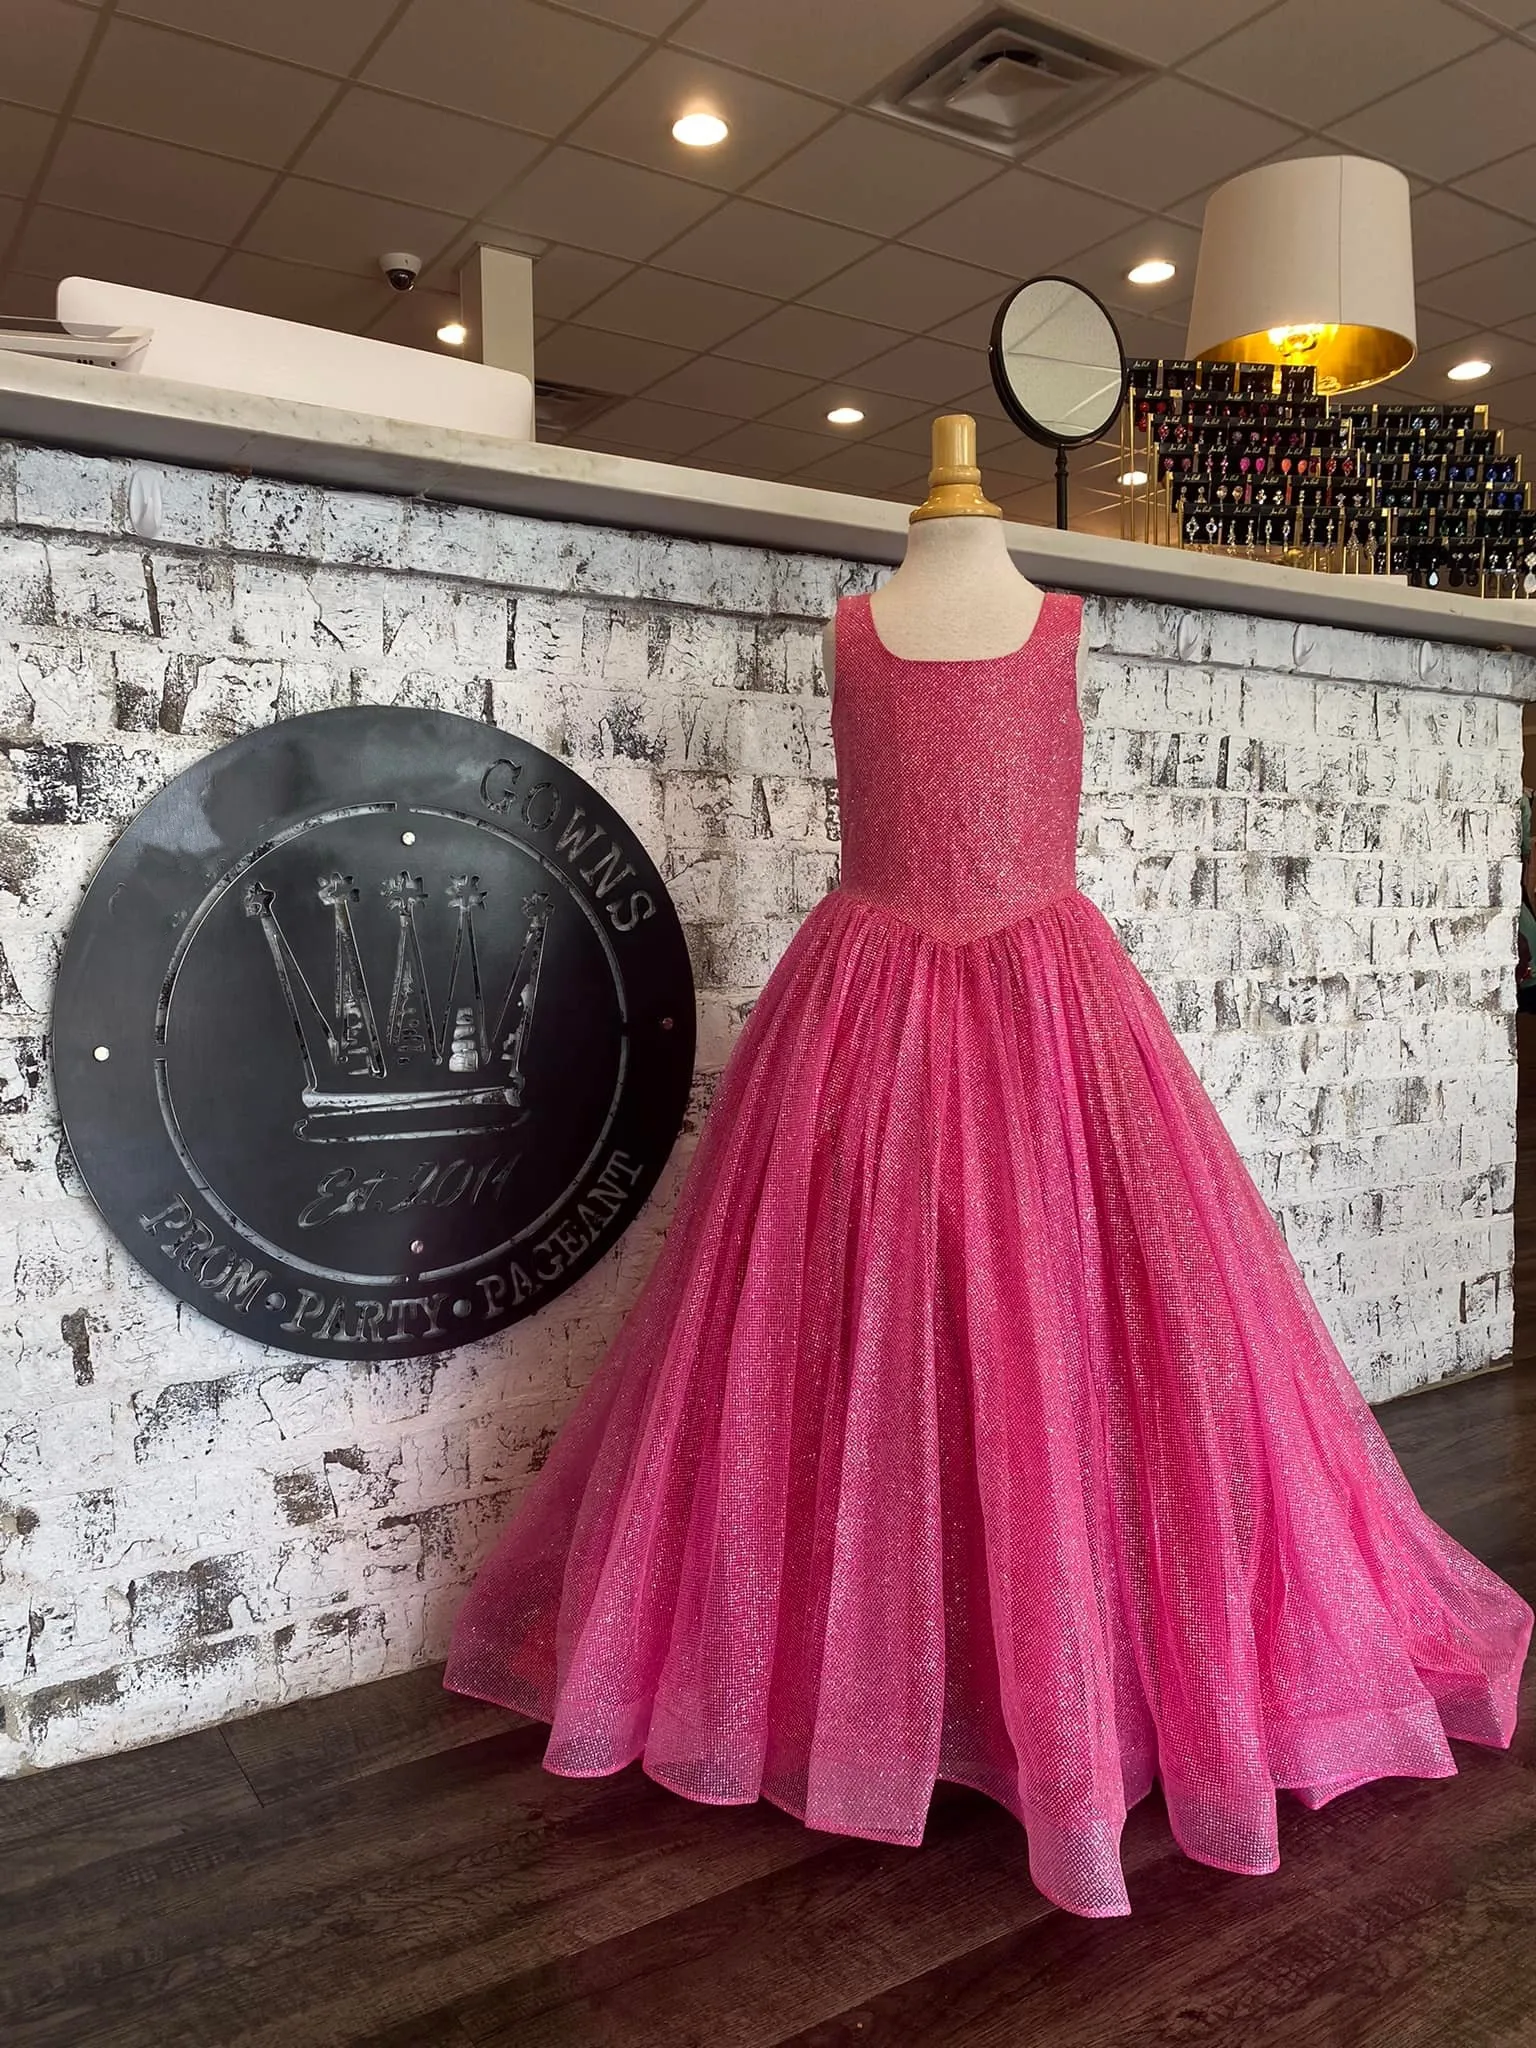 Sparkling Girls Pageant Dresses 2019 Ball Gowns Unique Designer Cupcake  Child Glitz Flower Girls Dresses For Wedding Size 3 4 6 8 10 From Yymdress,  $49.75 | DHgate.Com